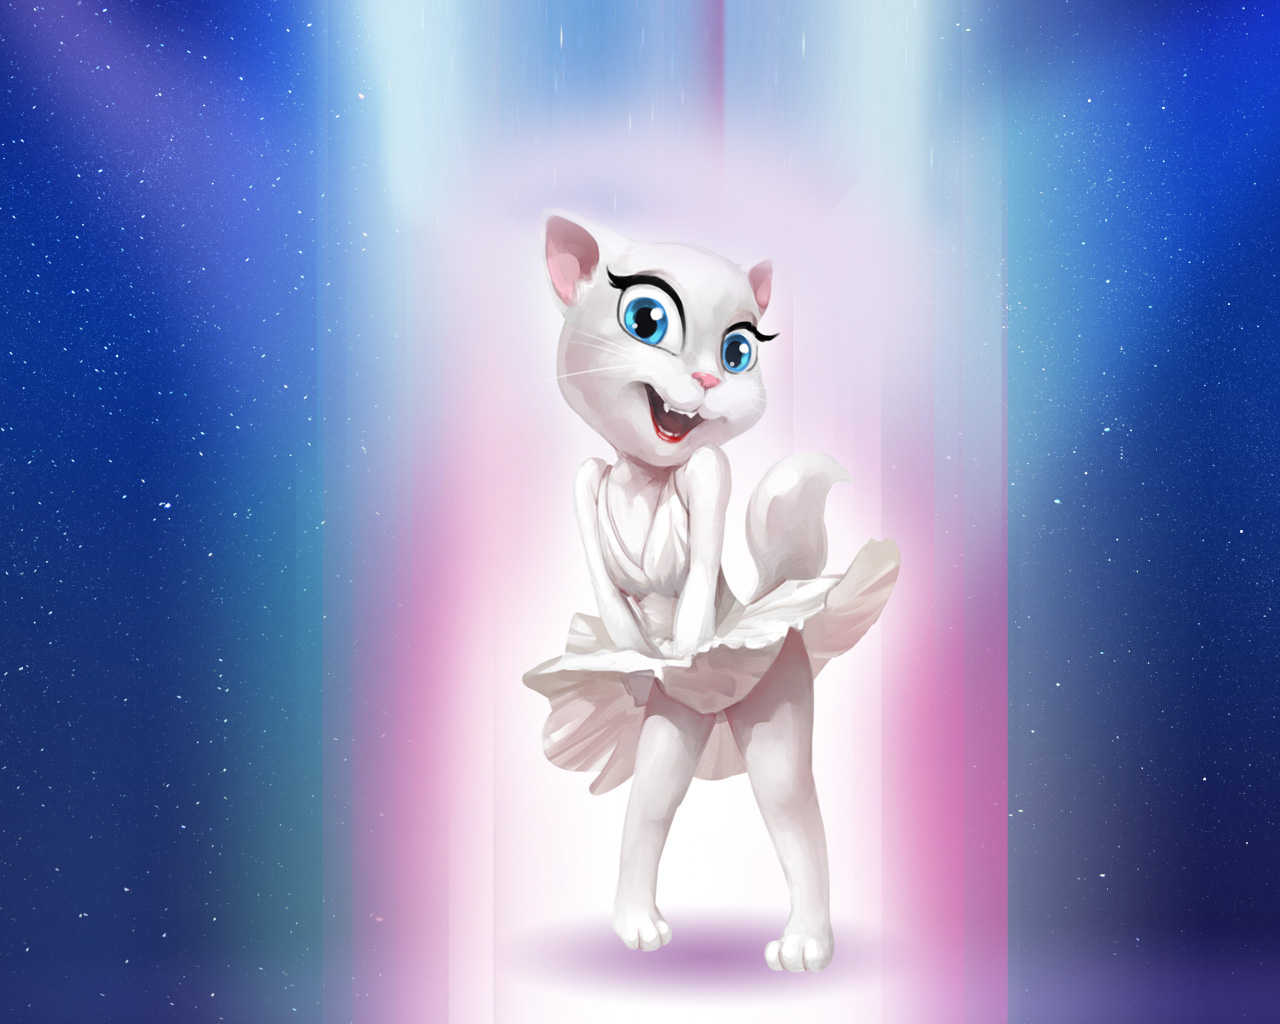 My Talking Angela Hack Coins and Diamonds 2021 [[Working Link]] 1